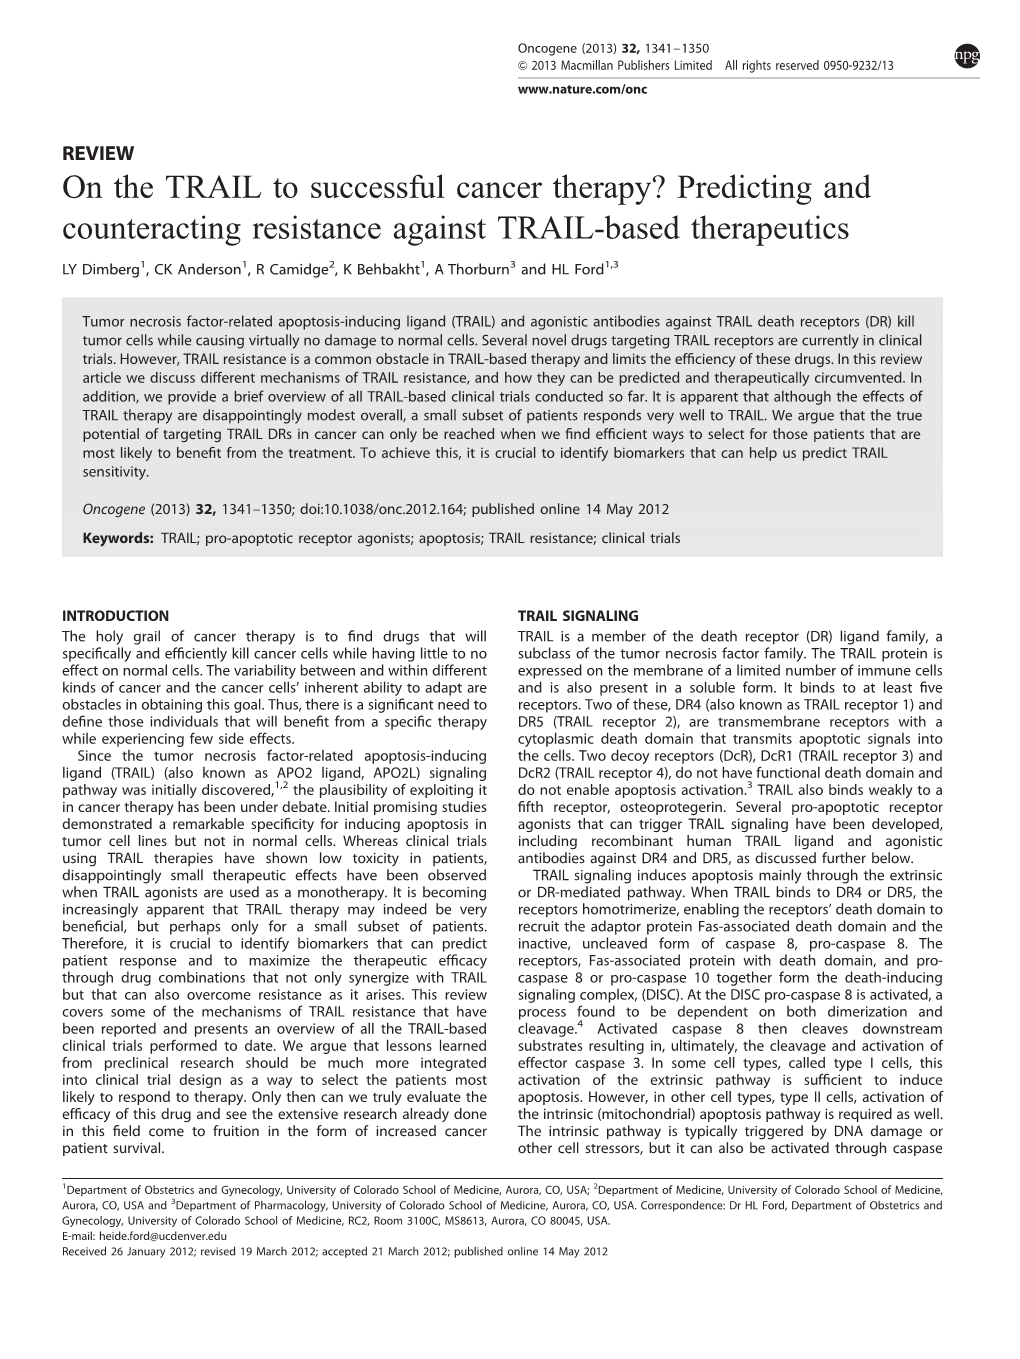 On the TRAIL to Successful Cancer Therapy? Predicting and Counteracting Resistance Against TRAIL-Based Therapeutics